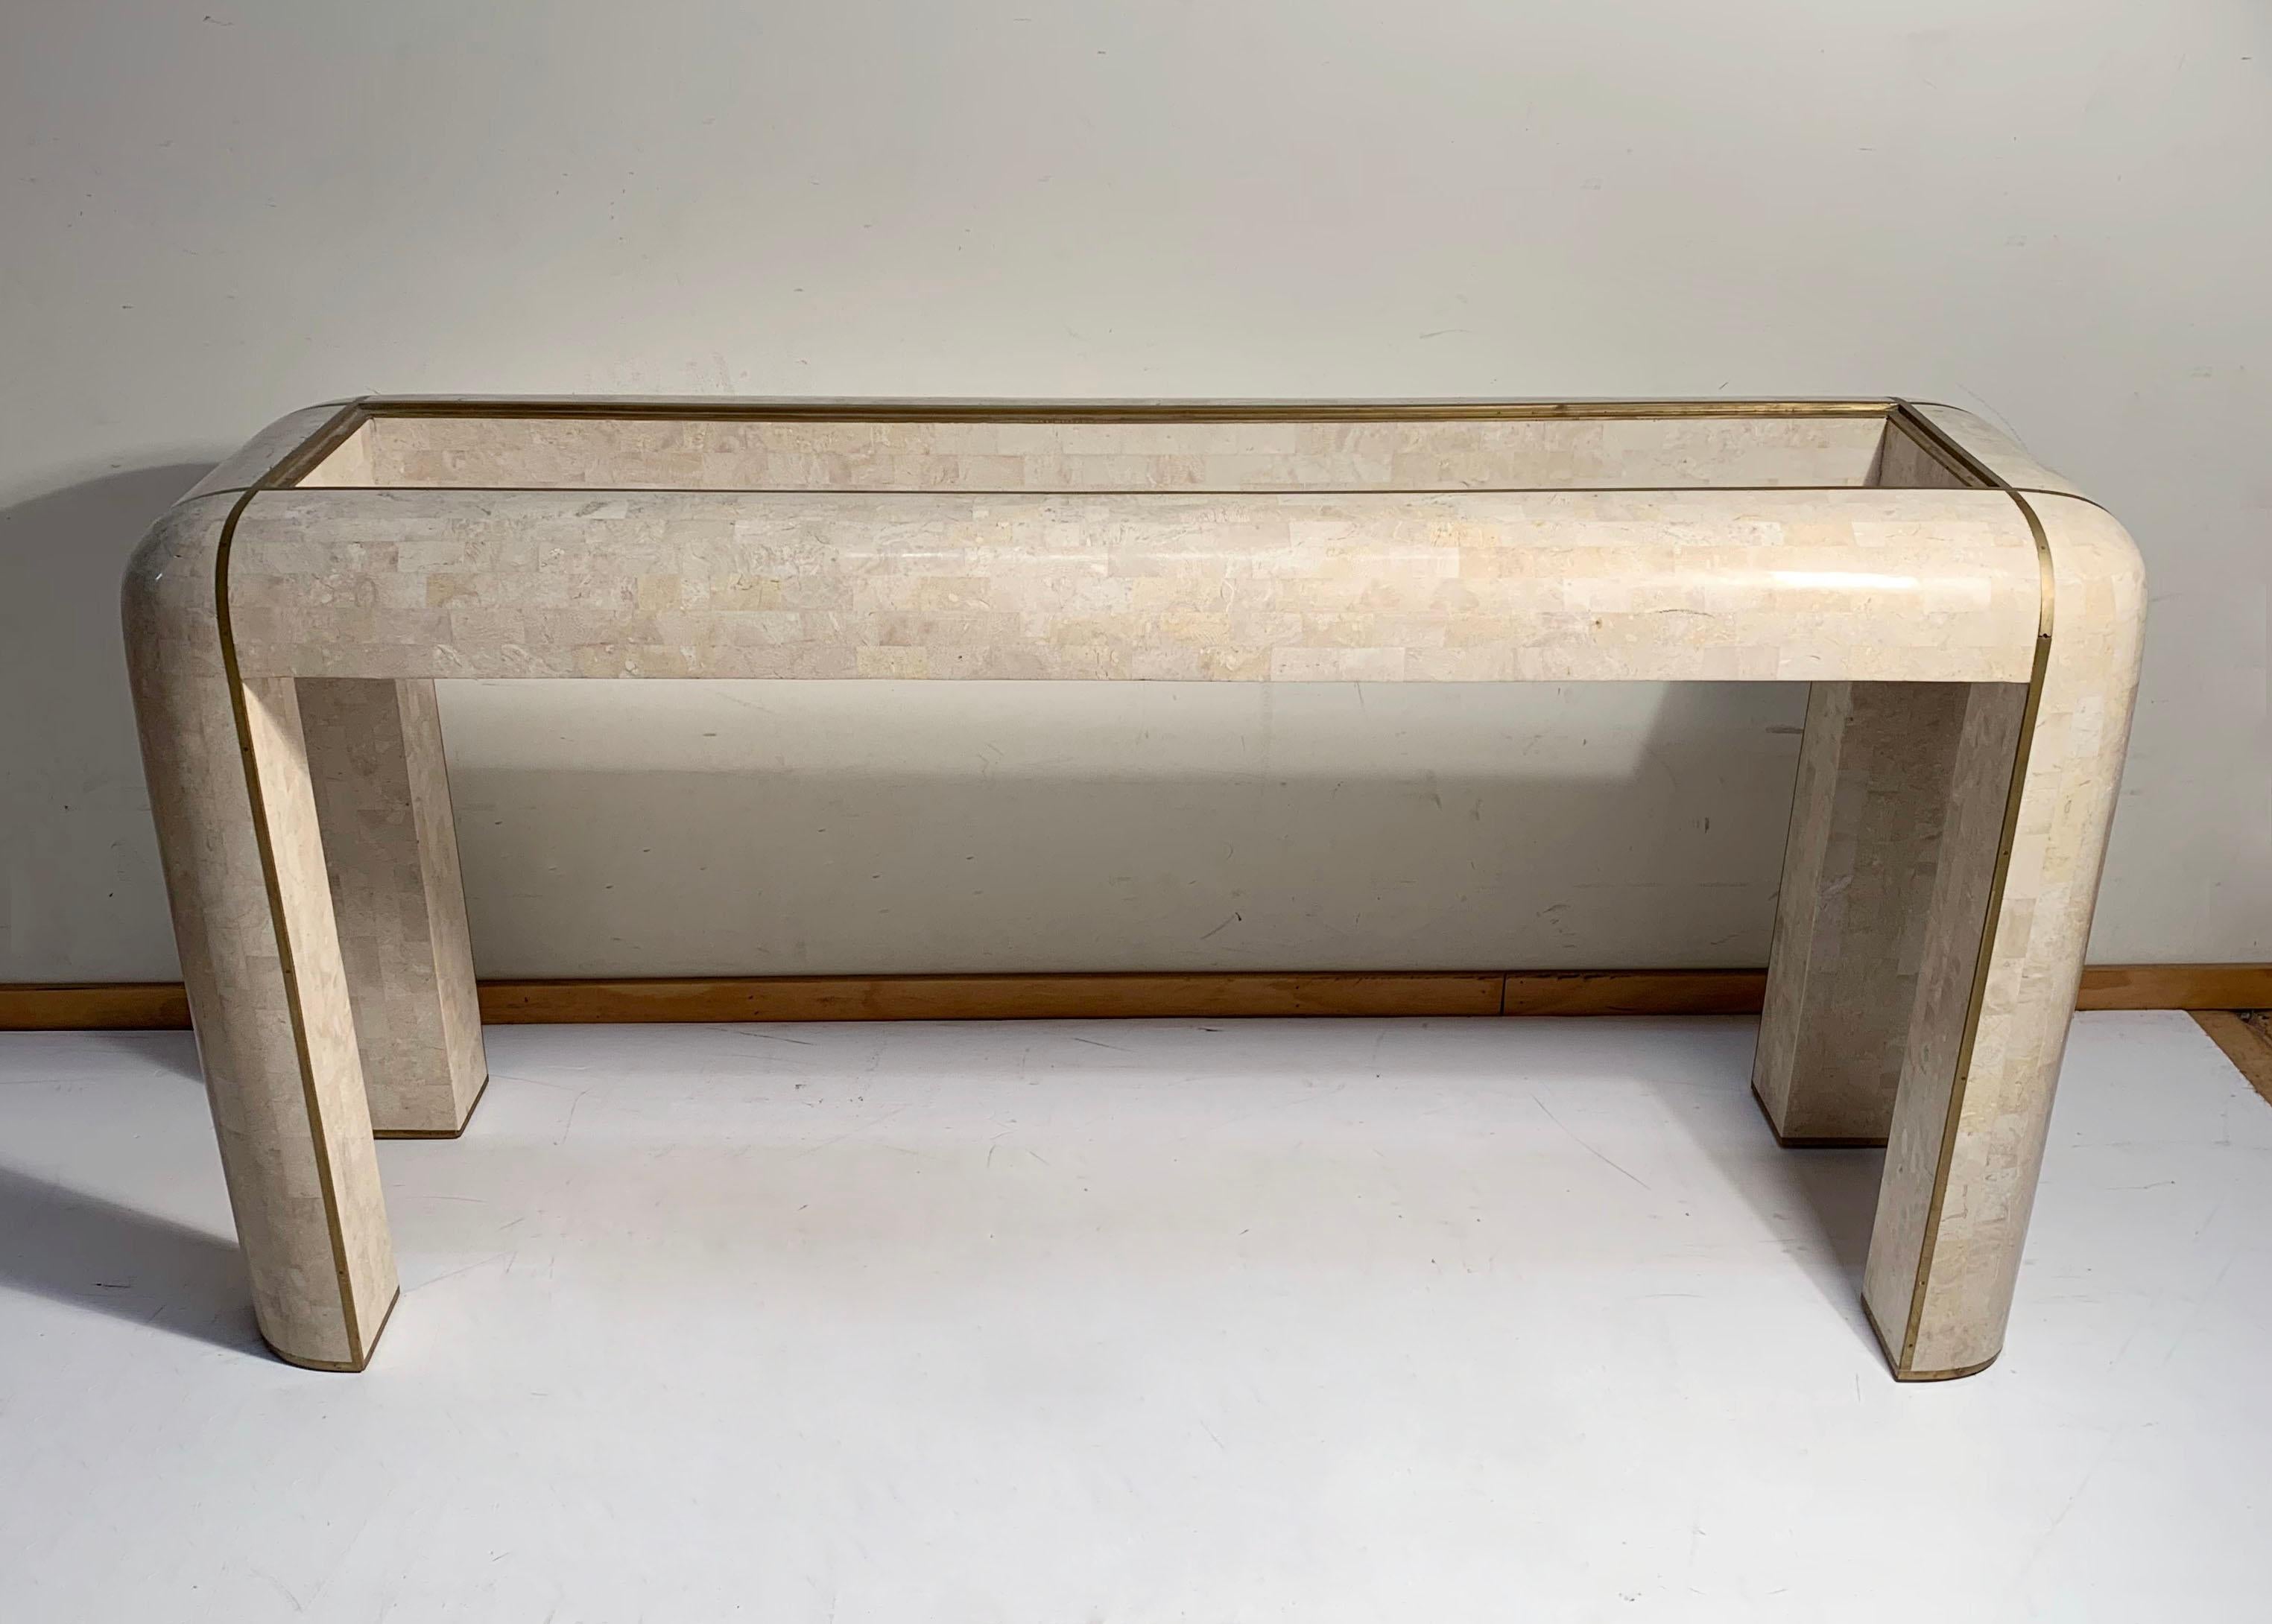 Maitland Smith console tessellated fossil mosaic stone marble console table.
Exceptional form with a beautiful cream/ivory color stone veneer. Brass inlay. In the manner of Karl Springer and Gabrielle Crespi.

A few areas that can use a repair.